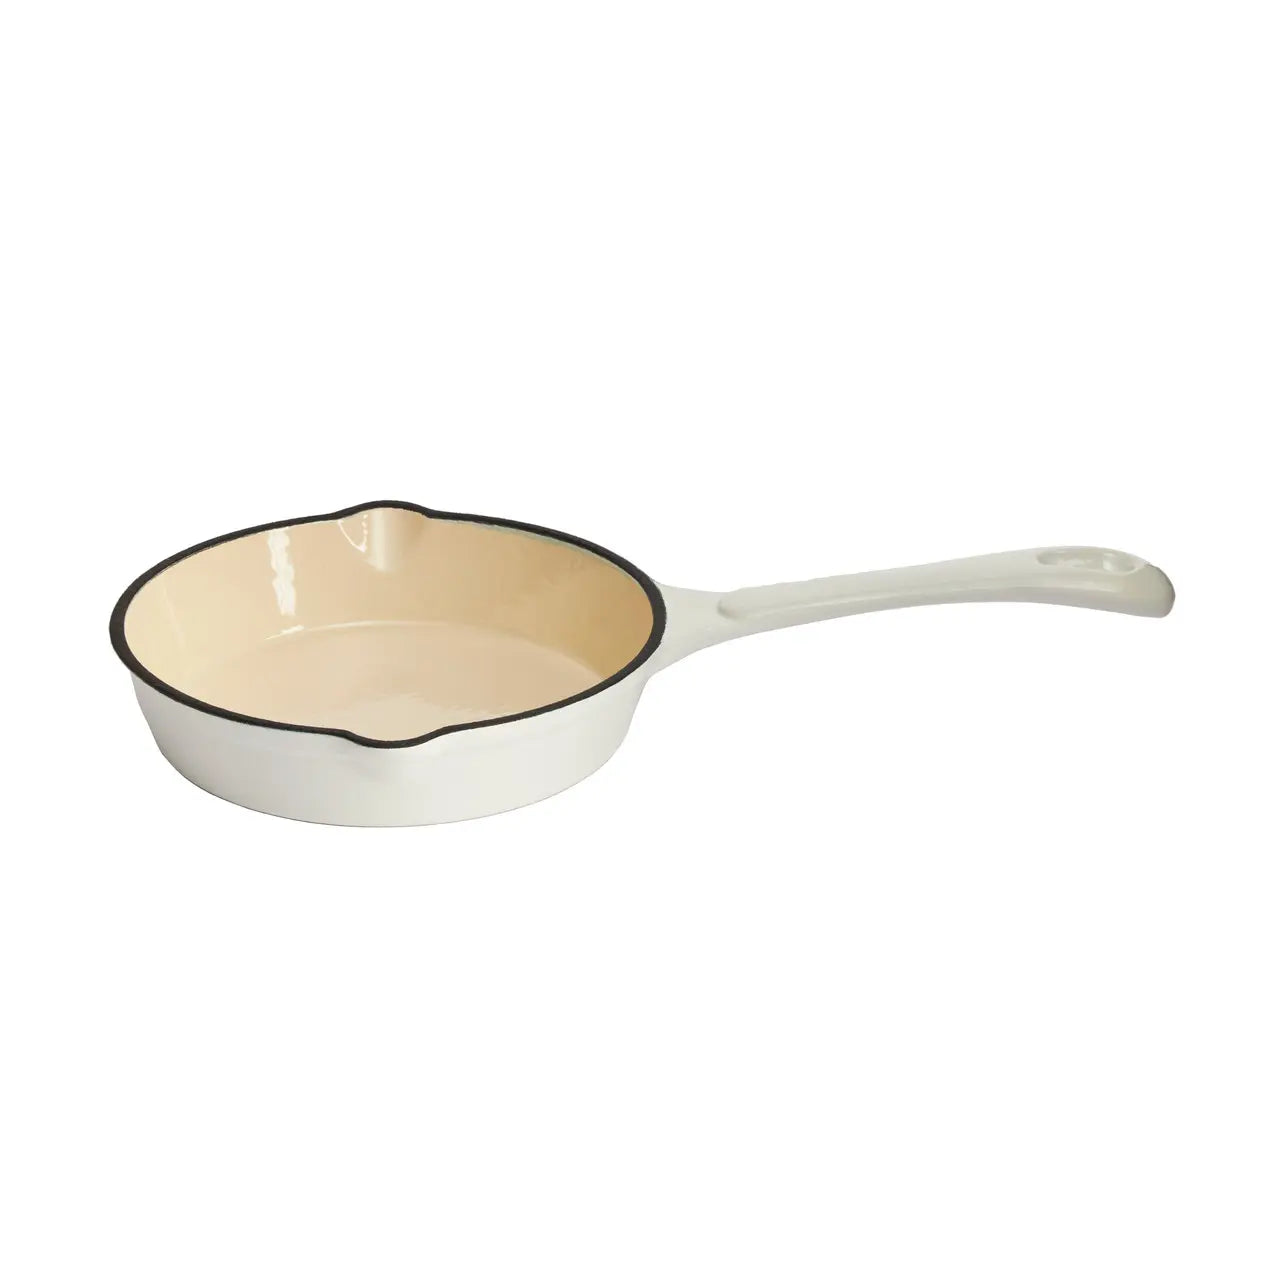 Enameled Cast Iron 6.5 inch Skillet in White